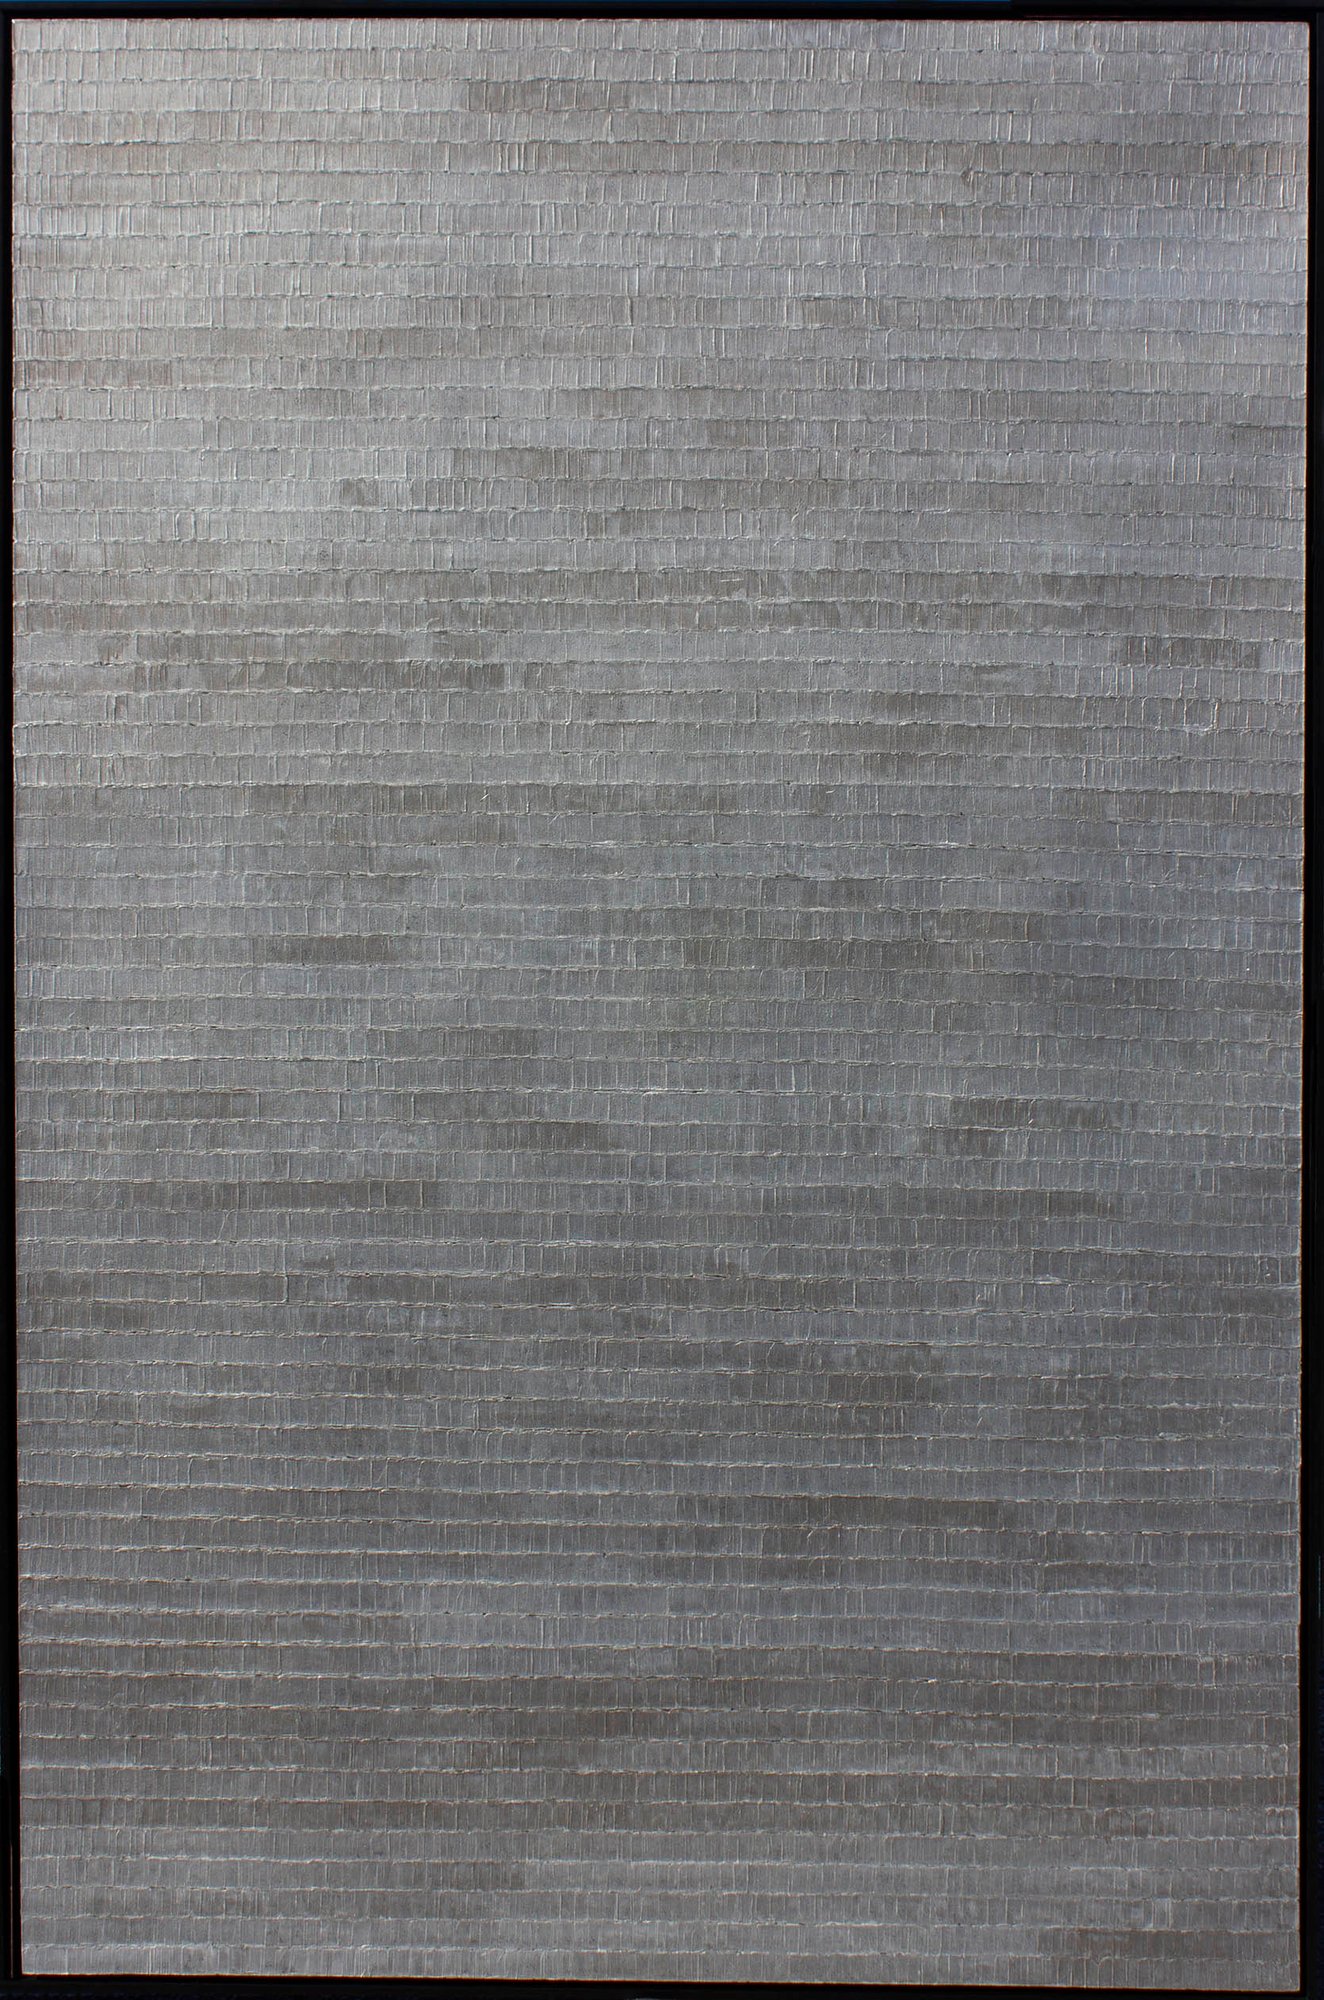 Stainless Steel - 73.25 x 49.25